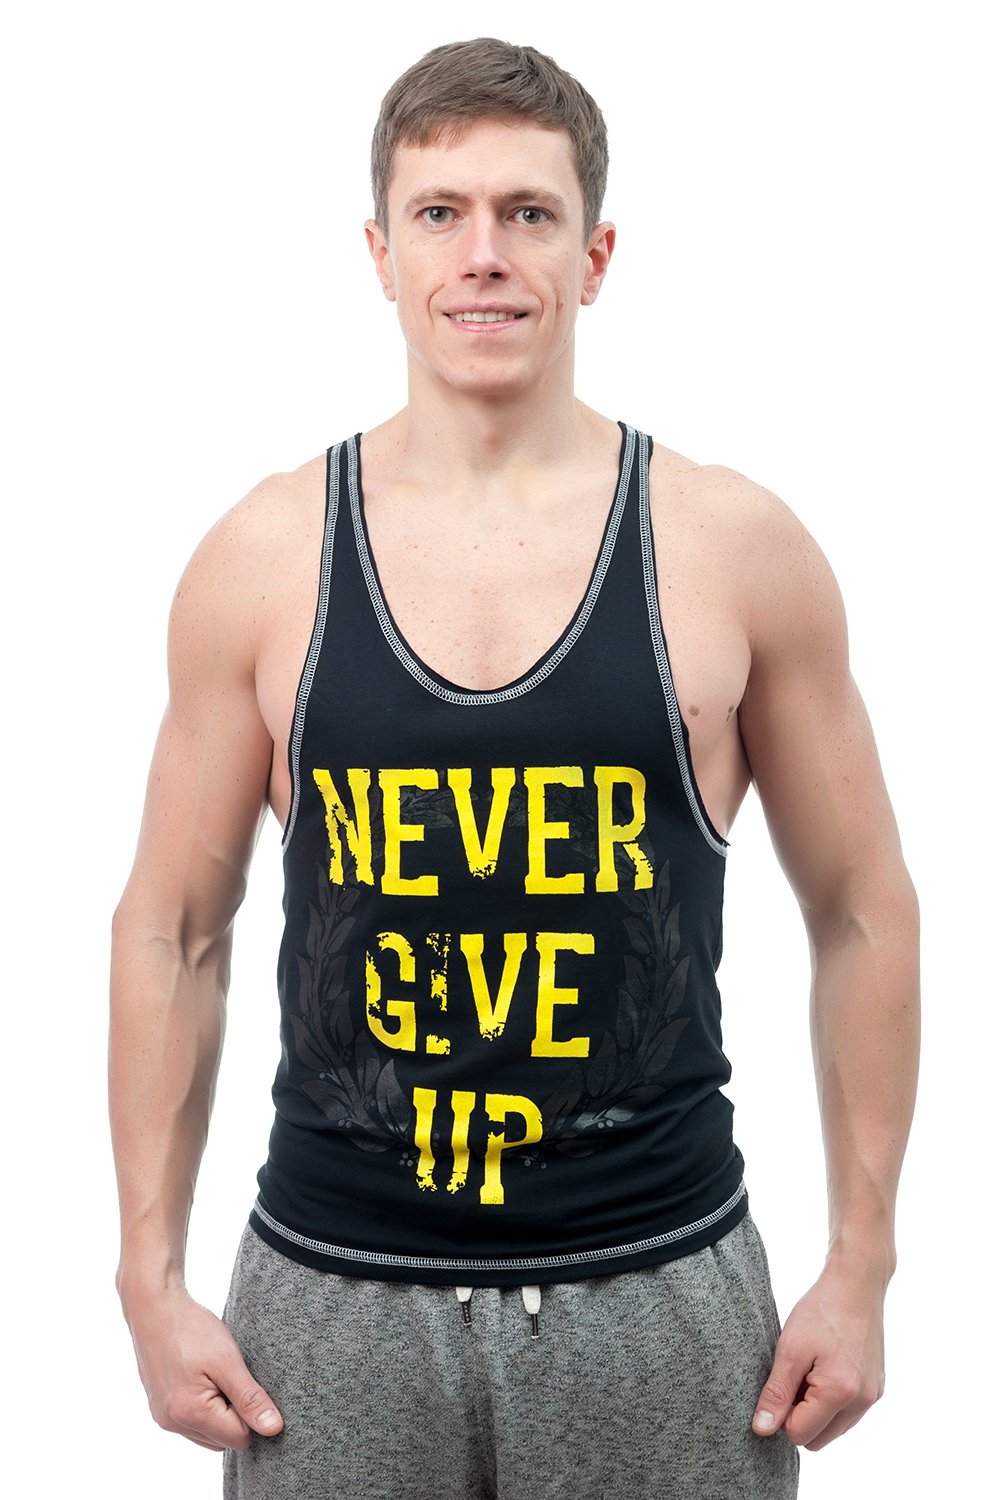 Men`s Stringer tank top Never give up, black, yellow print, size L